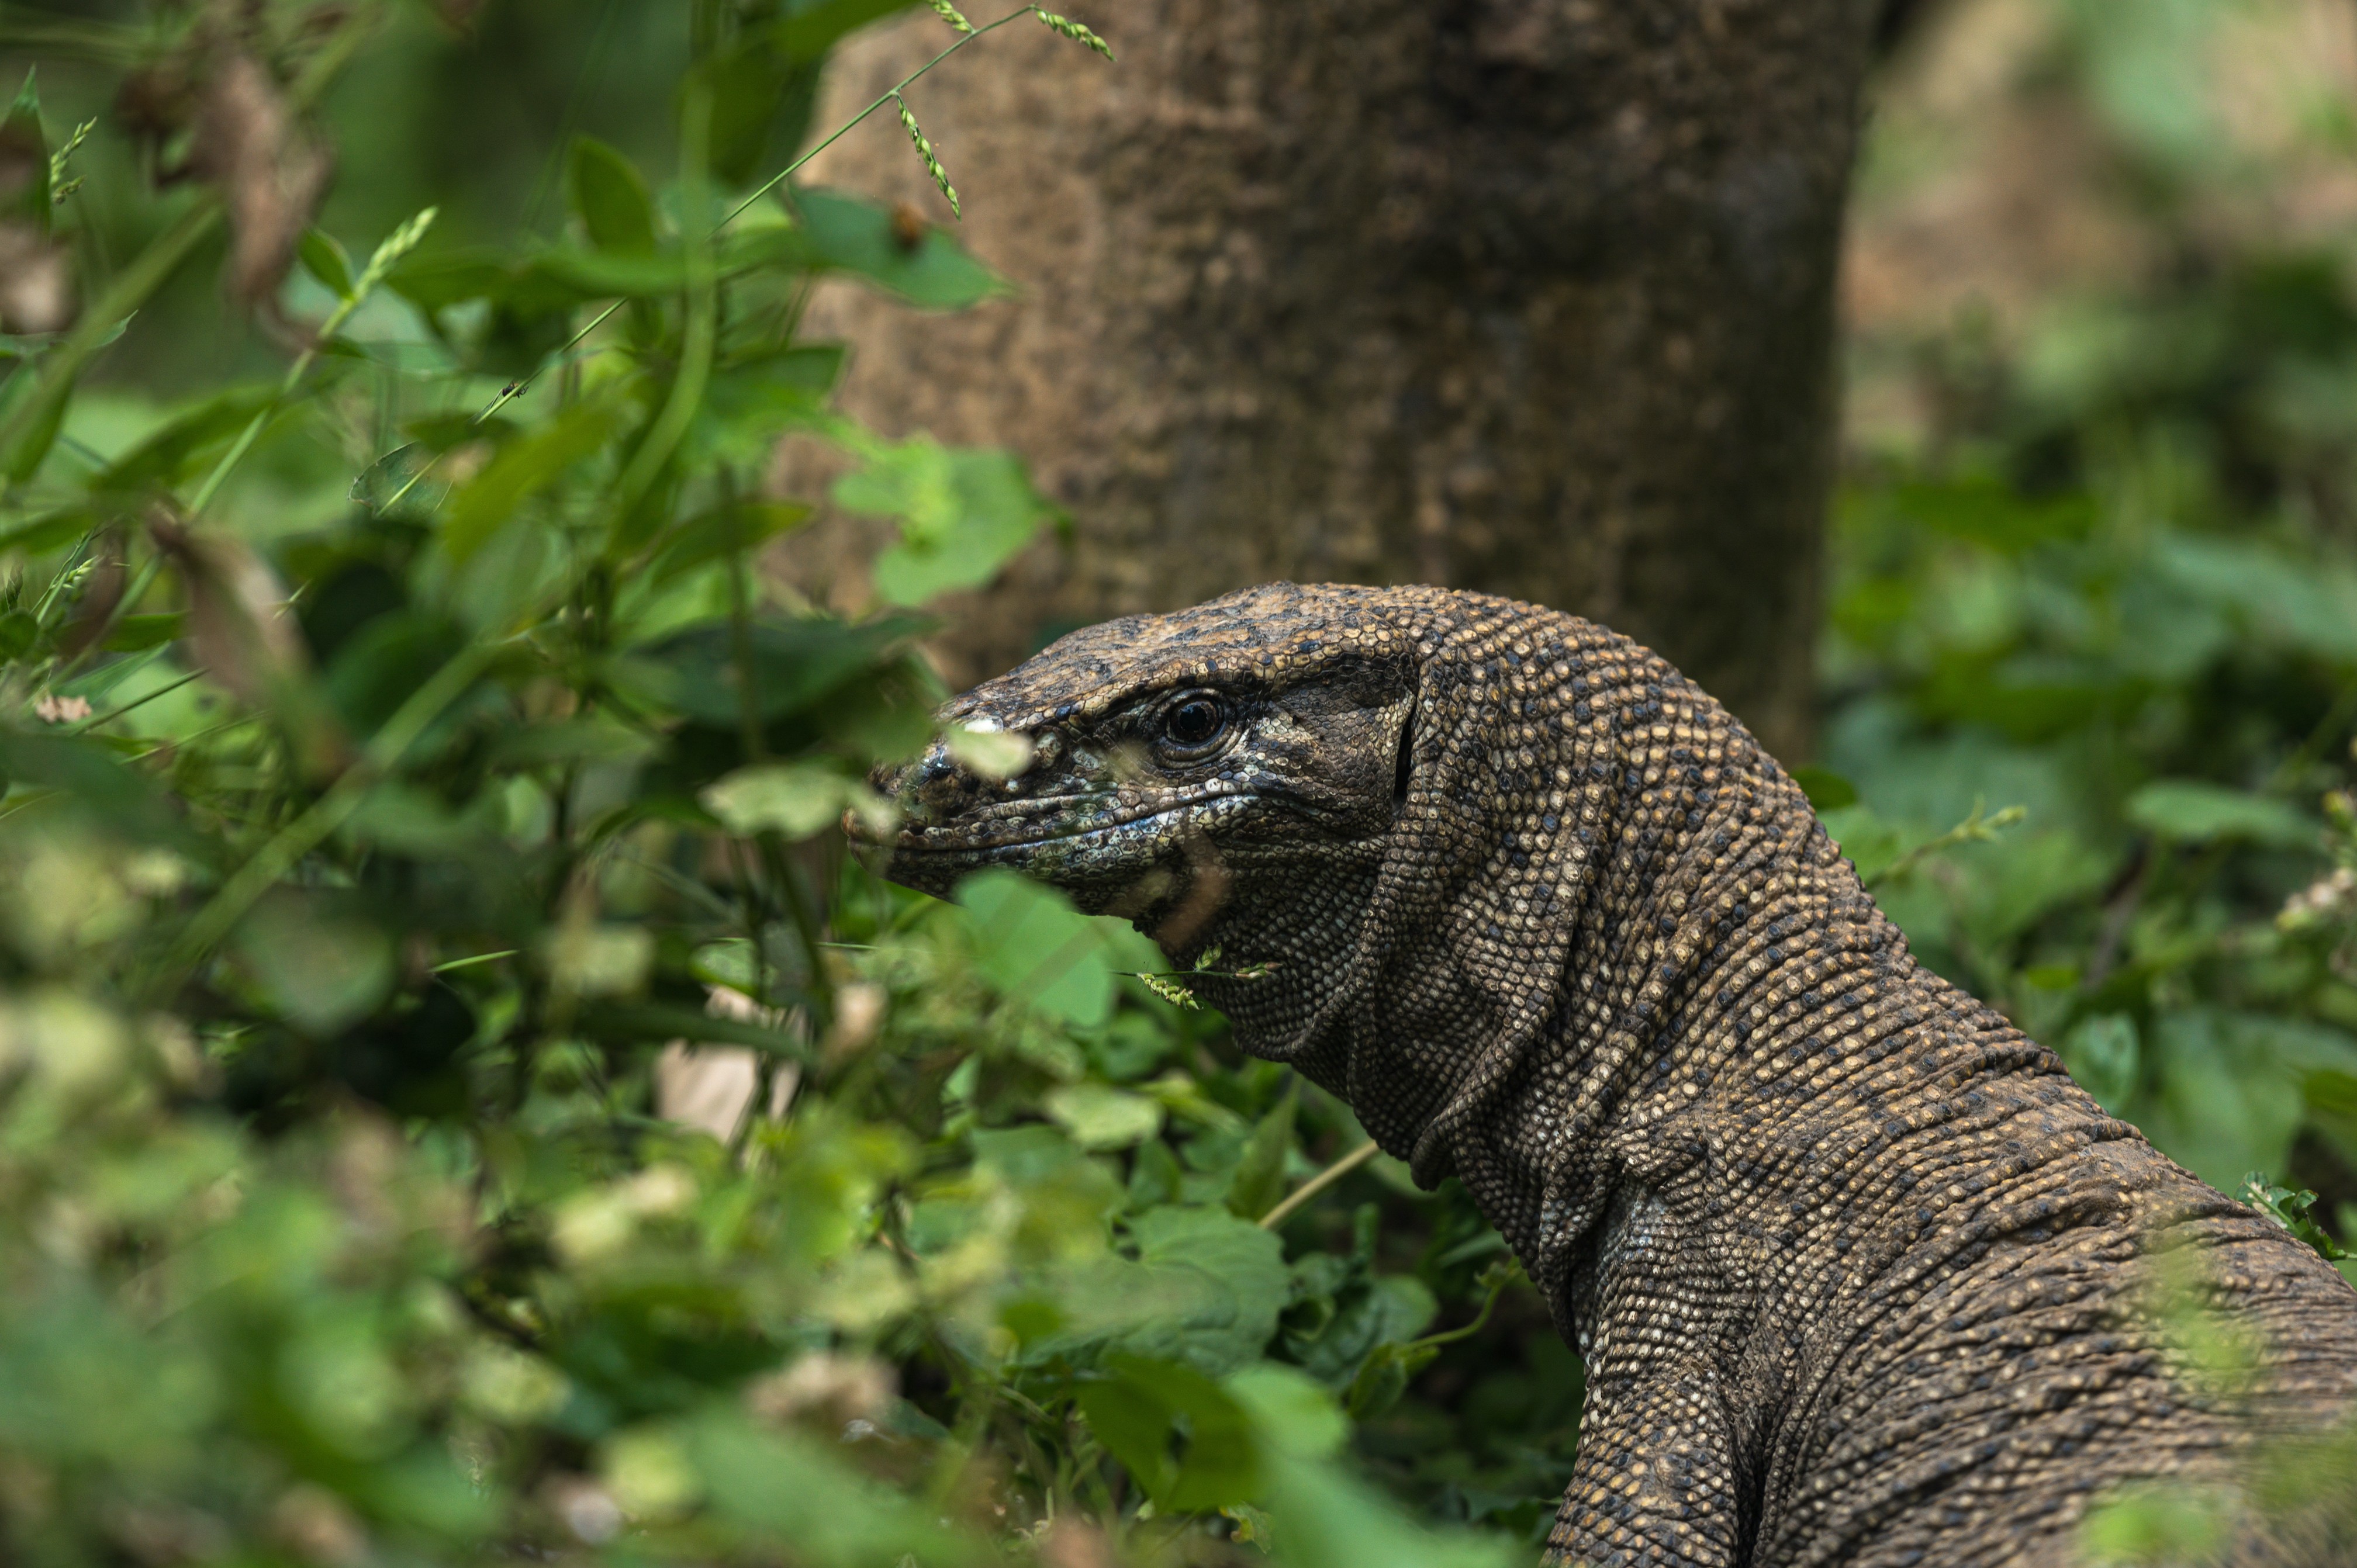 4 Men Gang Raped a Protected Monitor Lizard. Experts Explain Why.